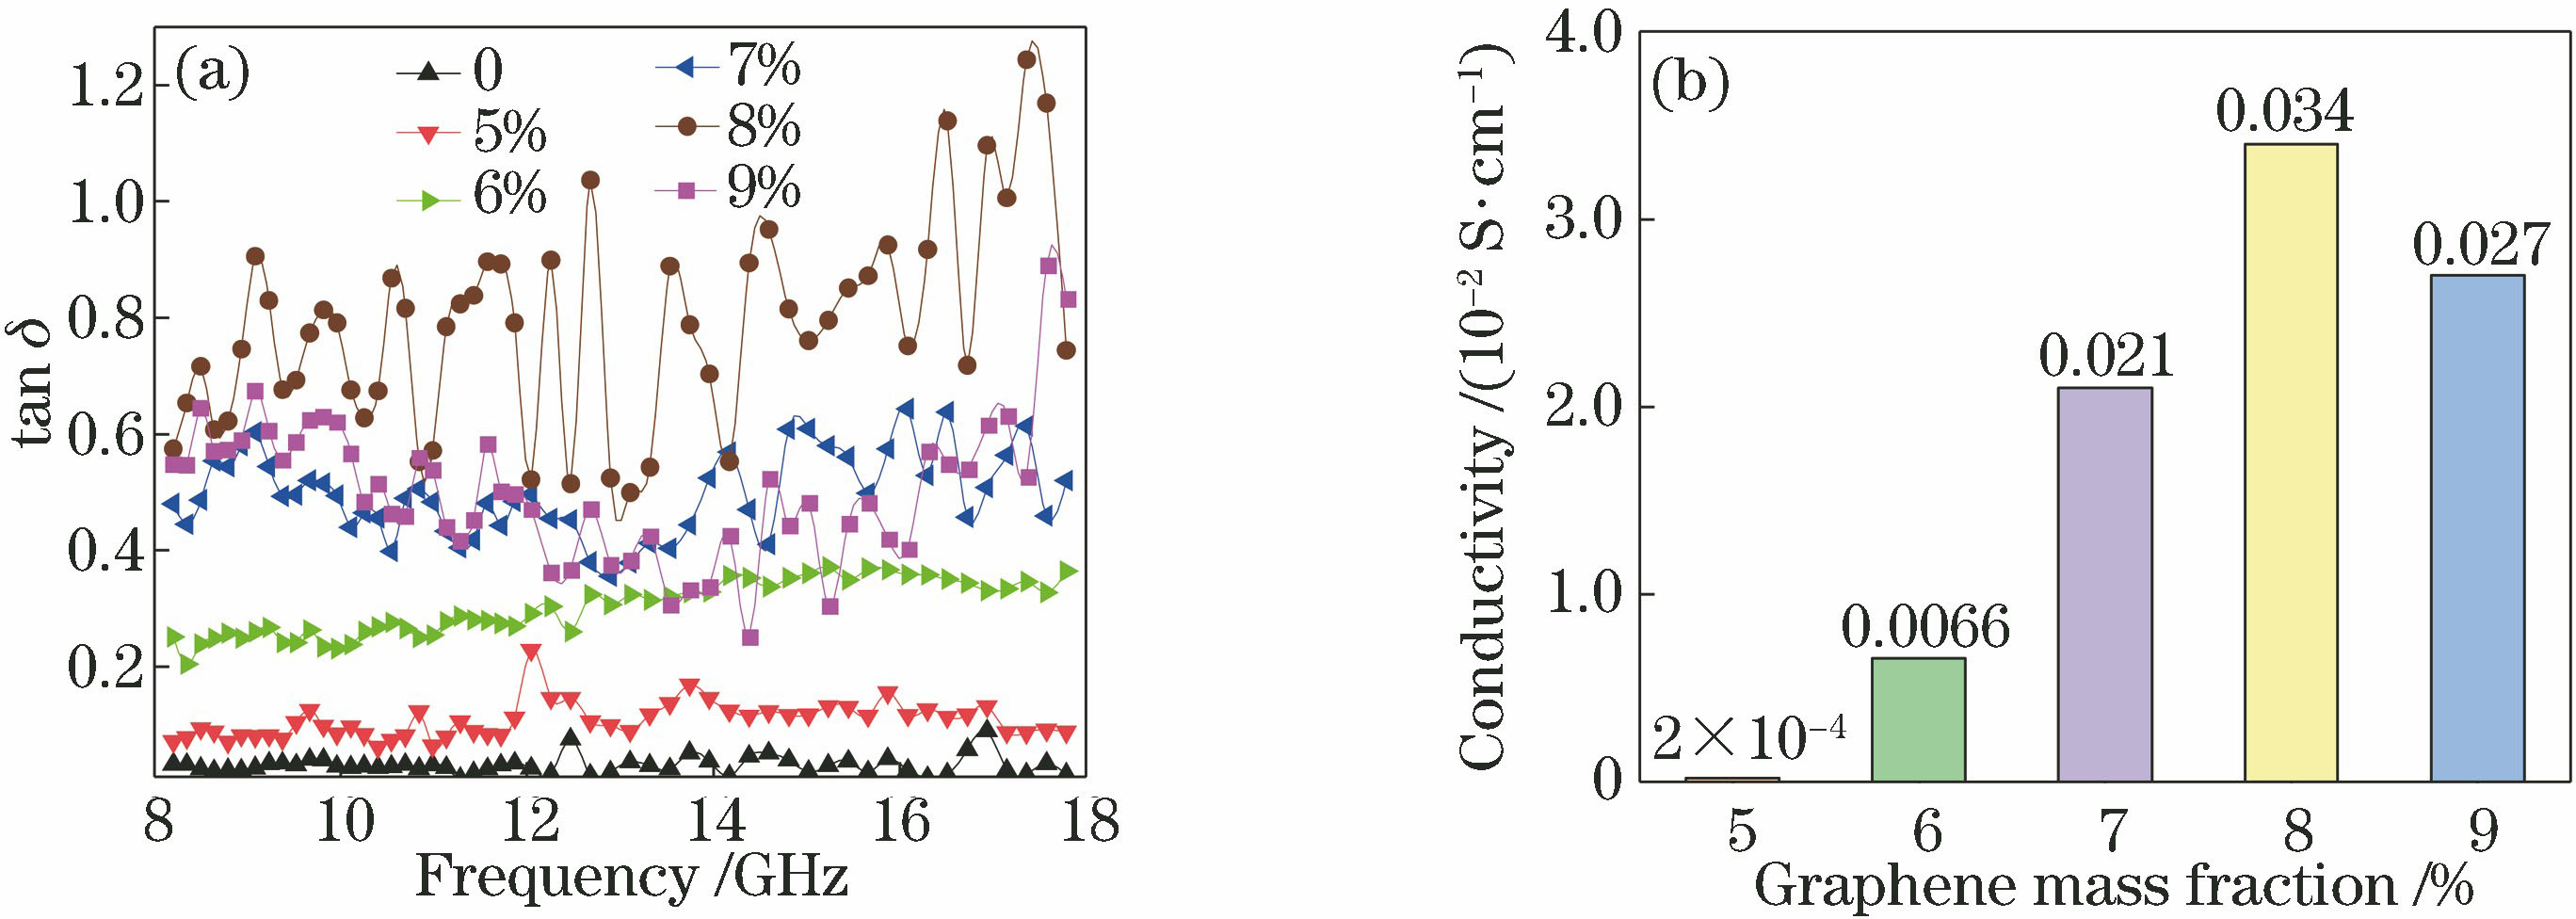 tanδ and conductivity of single-layer samples with different graphene contents. (a) tanδ; (b) conductivity